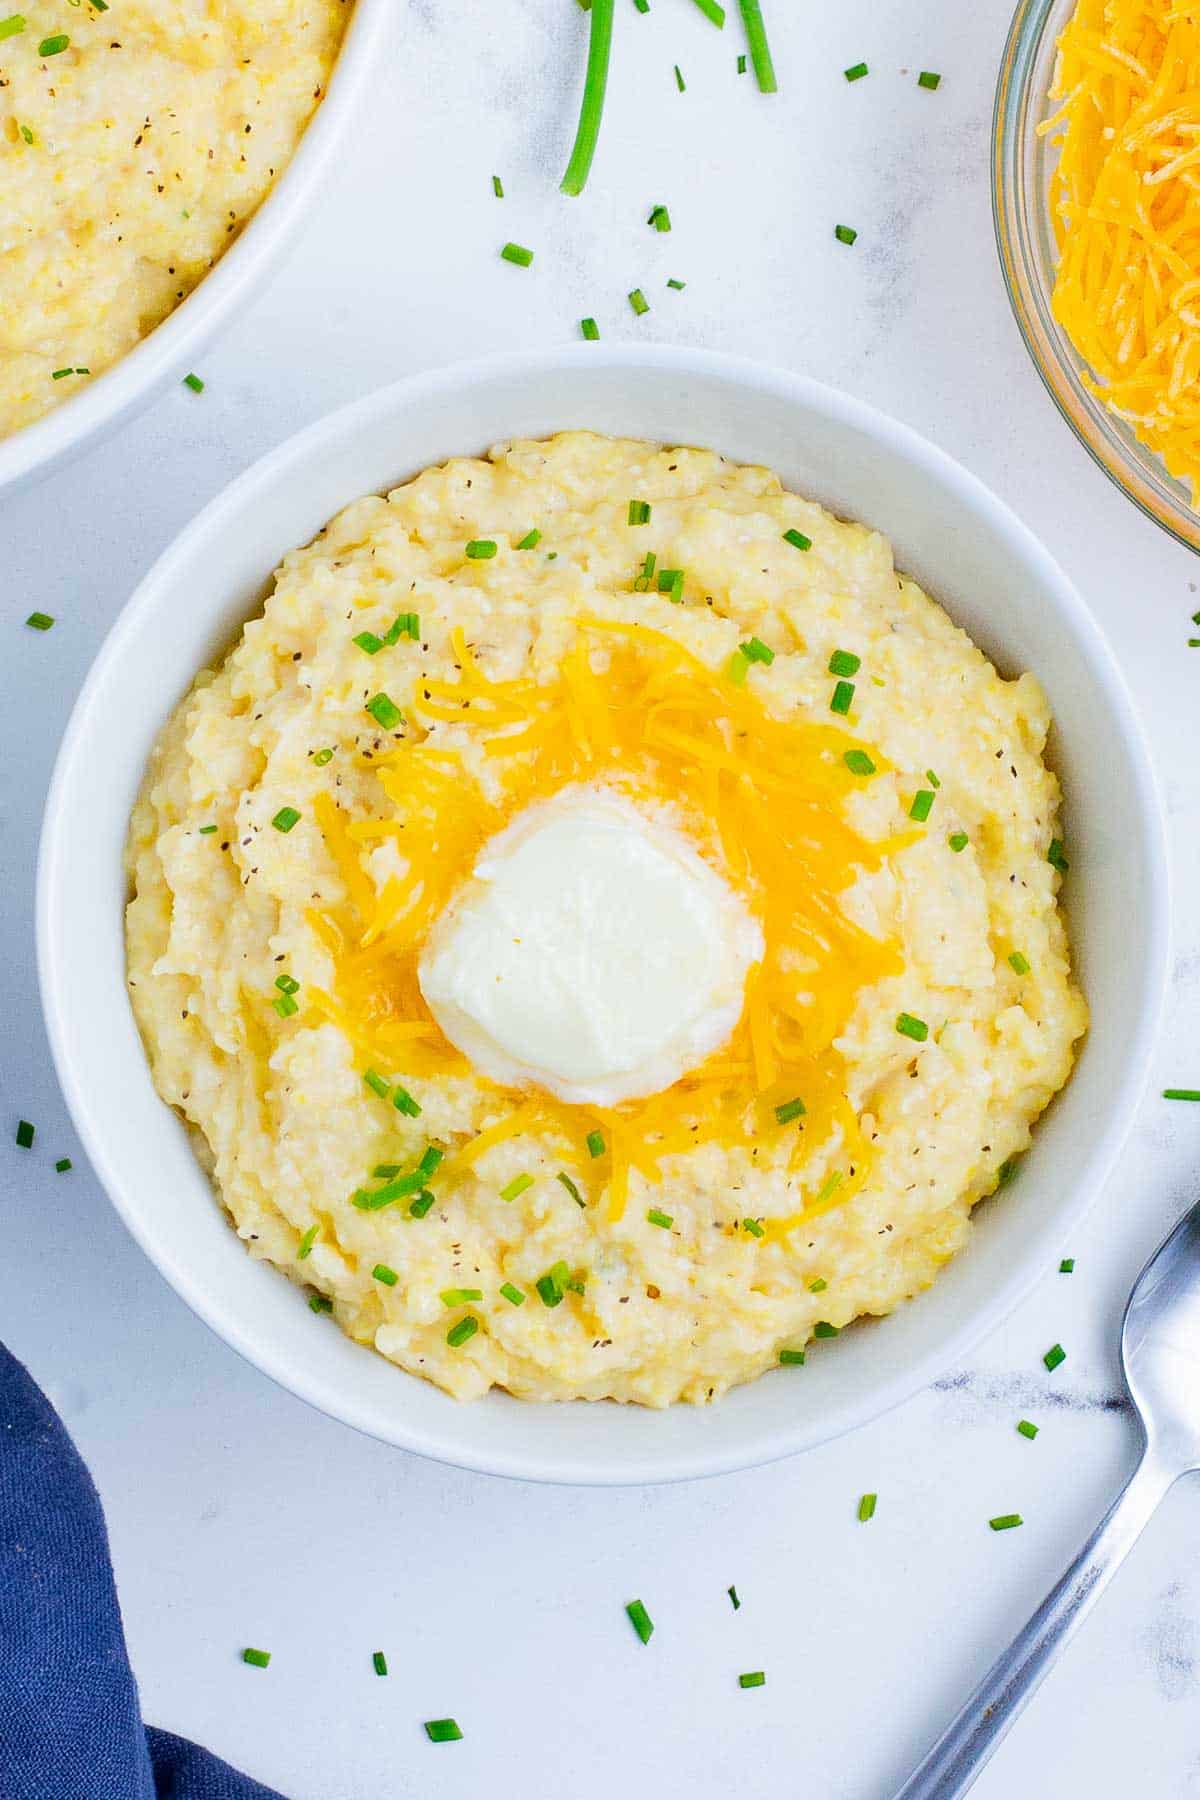 Gluten-free grits with cheese in a white bowl.